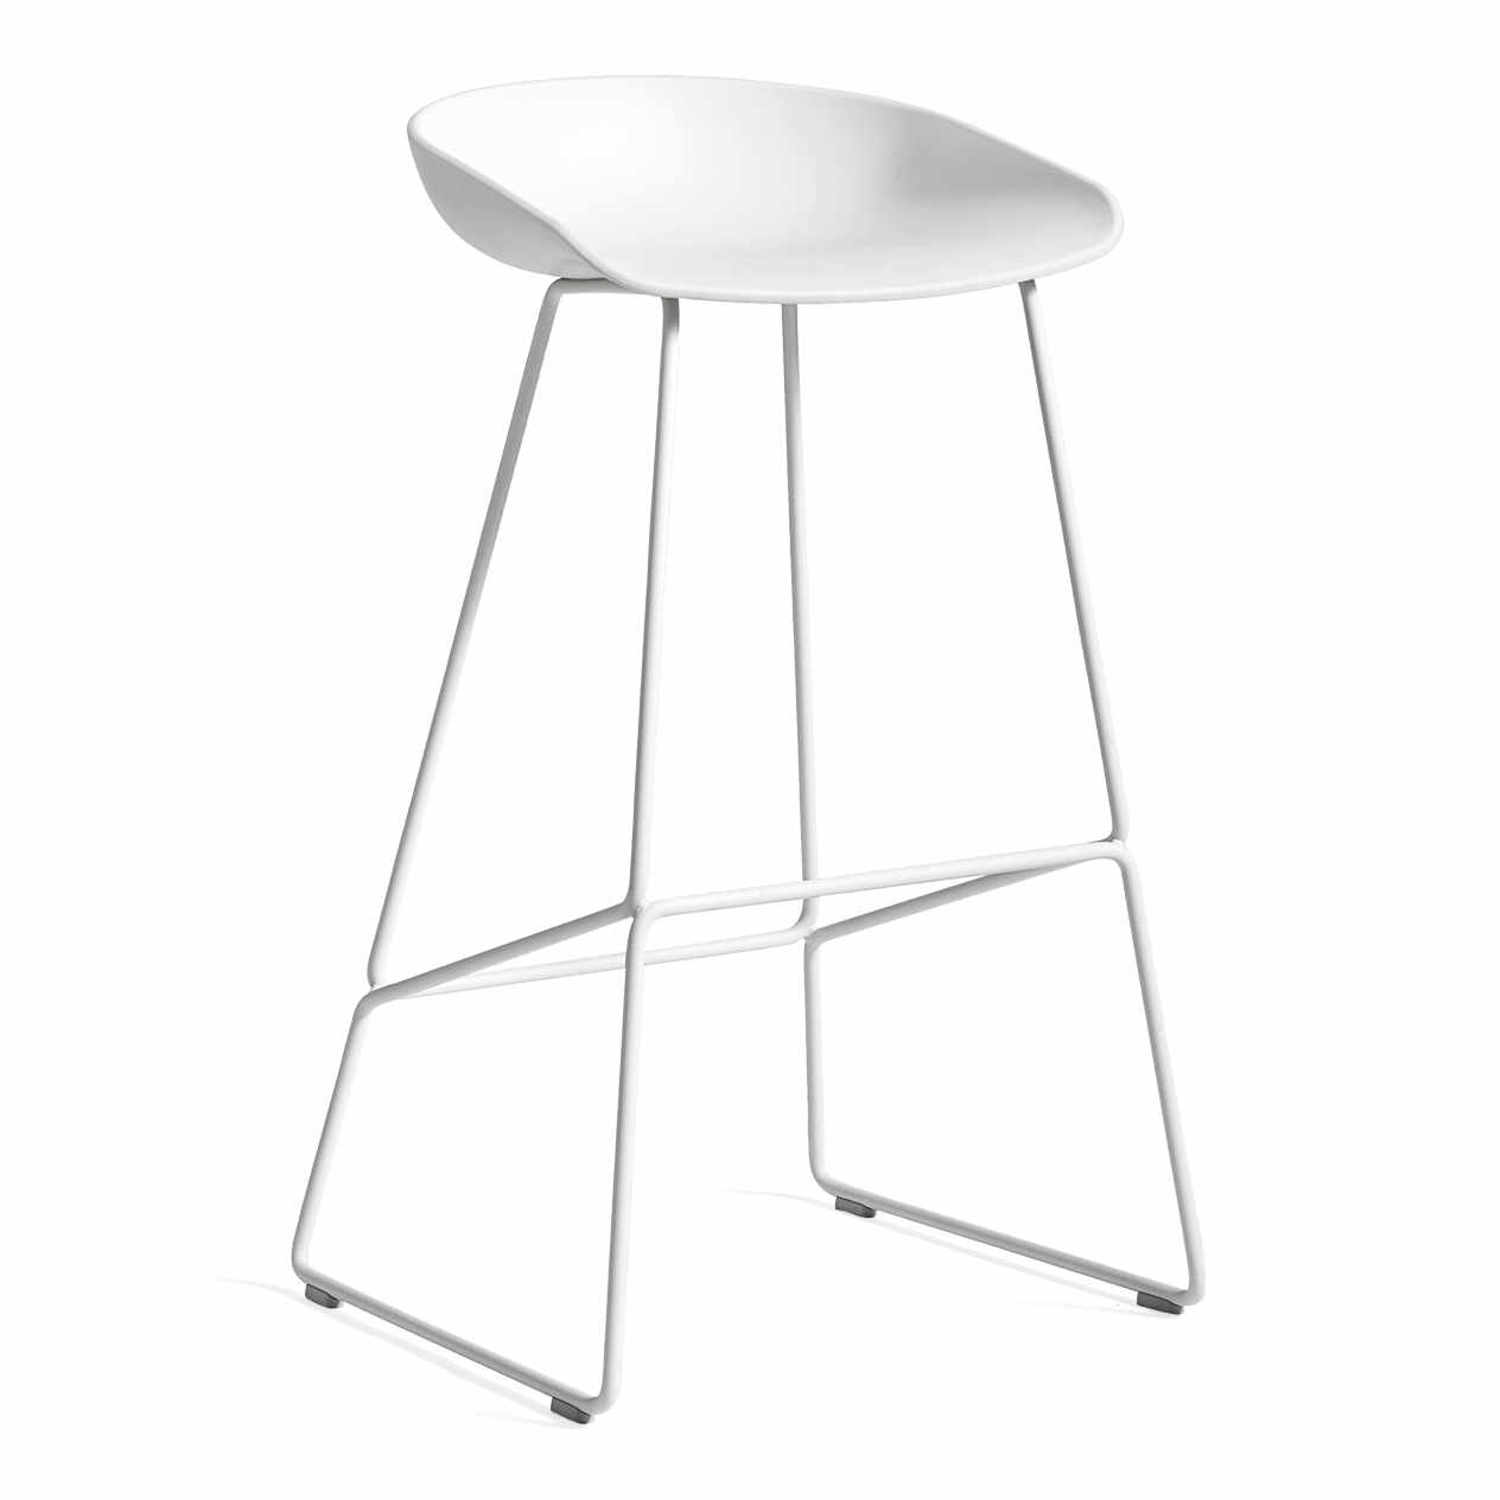 About a Stool AAS38 High Barstuhl, Sitz Polypropylen teal green 2.0 (recycled), Untergestell stahl, chrom von Hay